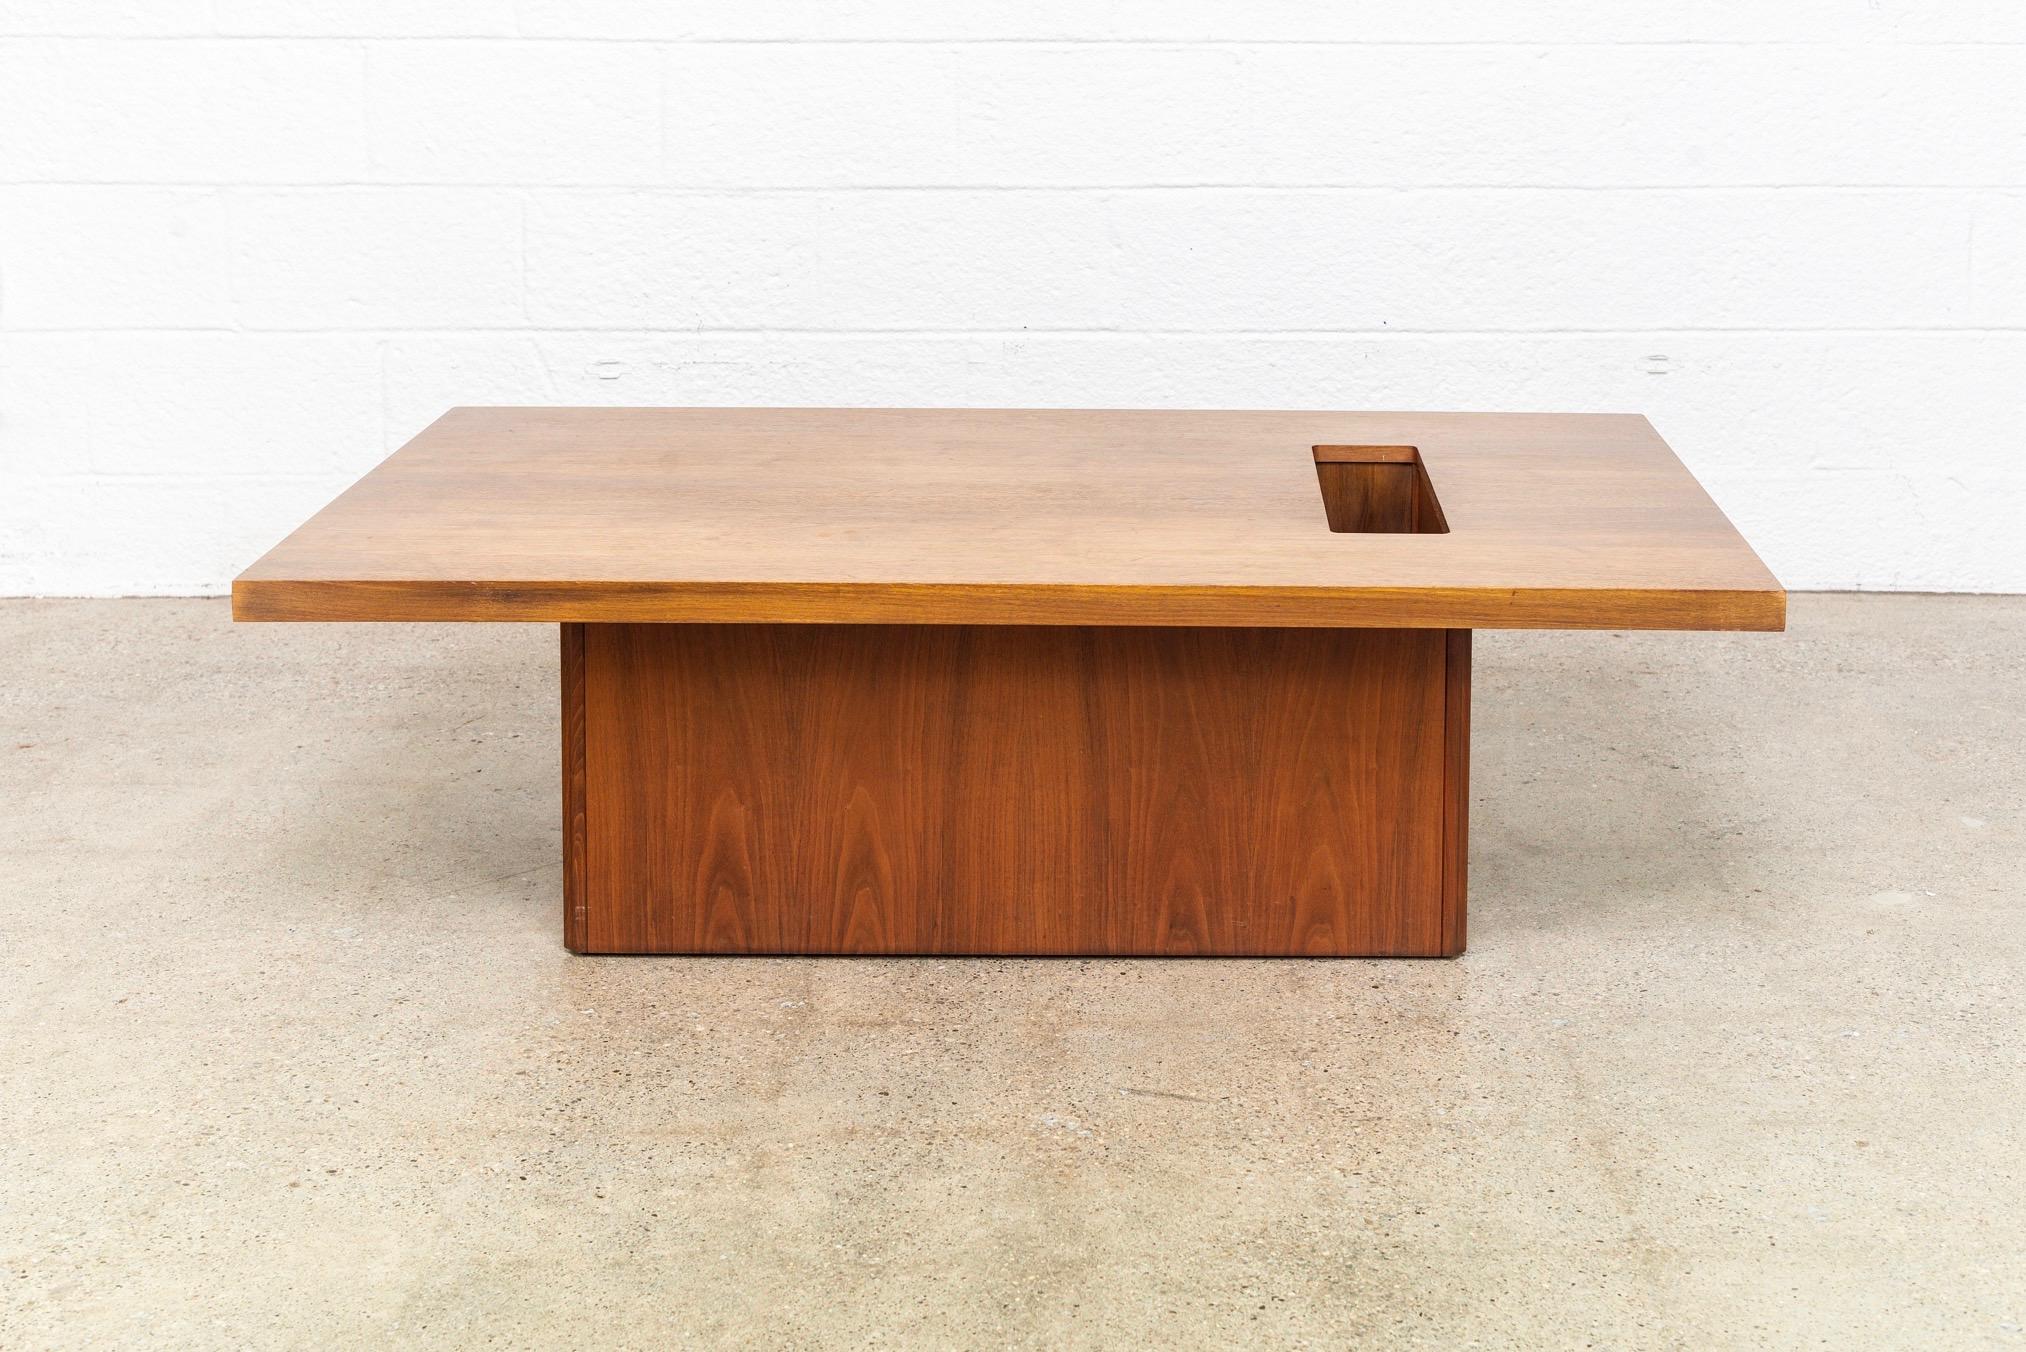 This vintage Mid-Century Modern Brown Saltman coffee table designed by John Keal circa 1960 has a Classic Minimalist design with a low profile and clean geometric lines. It is well constructed from solid walnut and walnut veneer with gorgeous wood